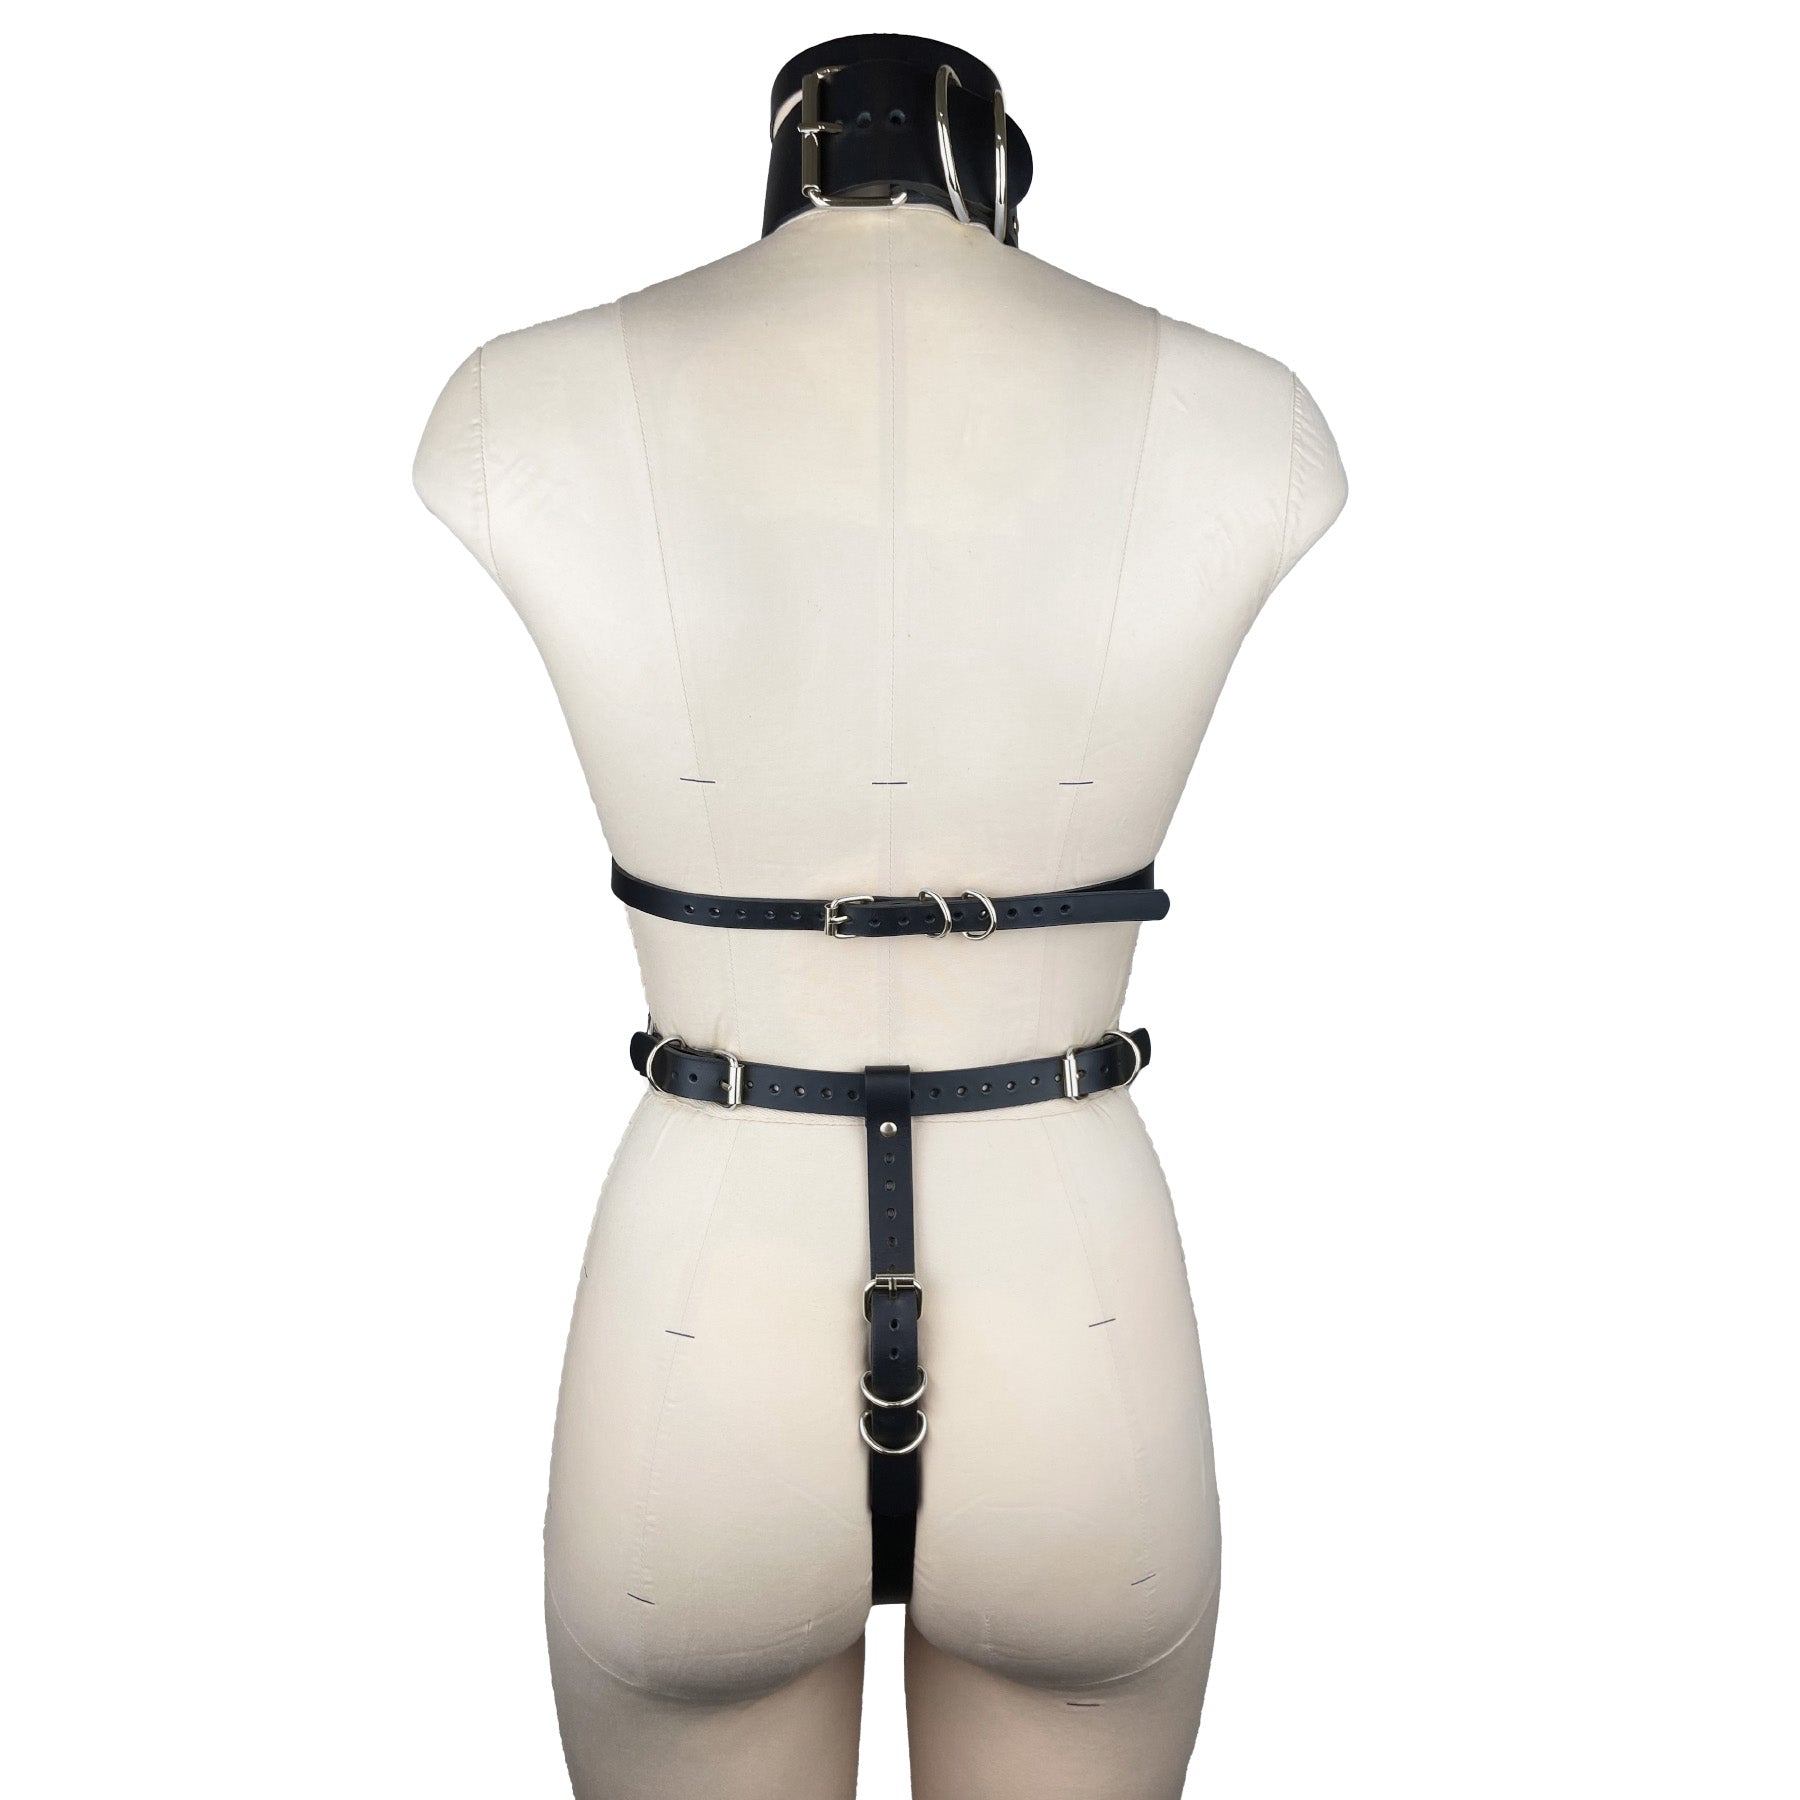 luxury italian leather fashion and fetish body harness, bespoke, made-to-order in nyc, back view